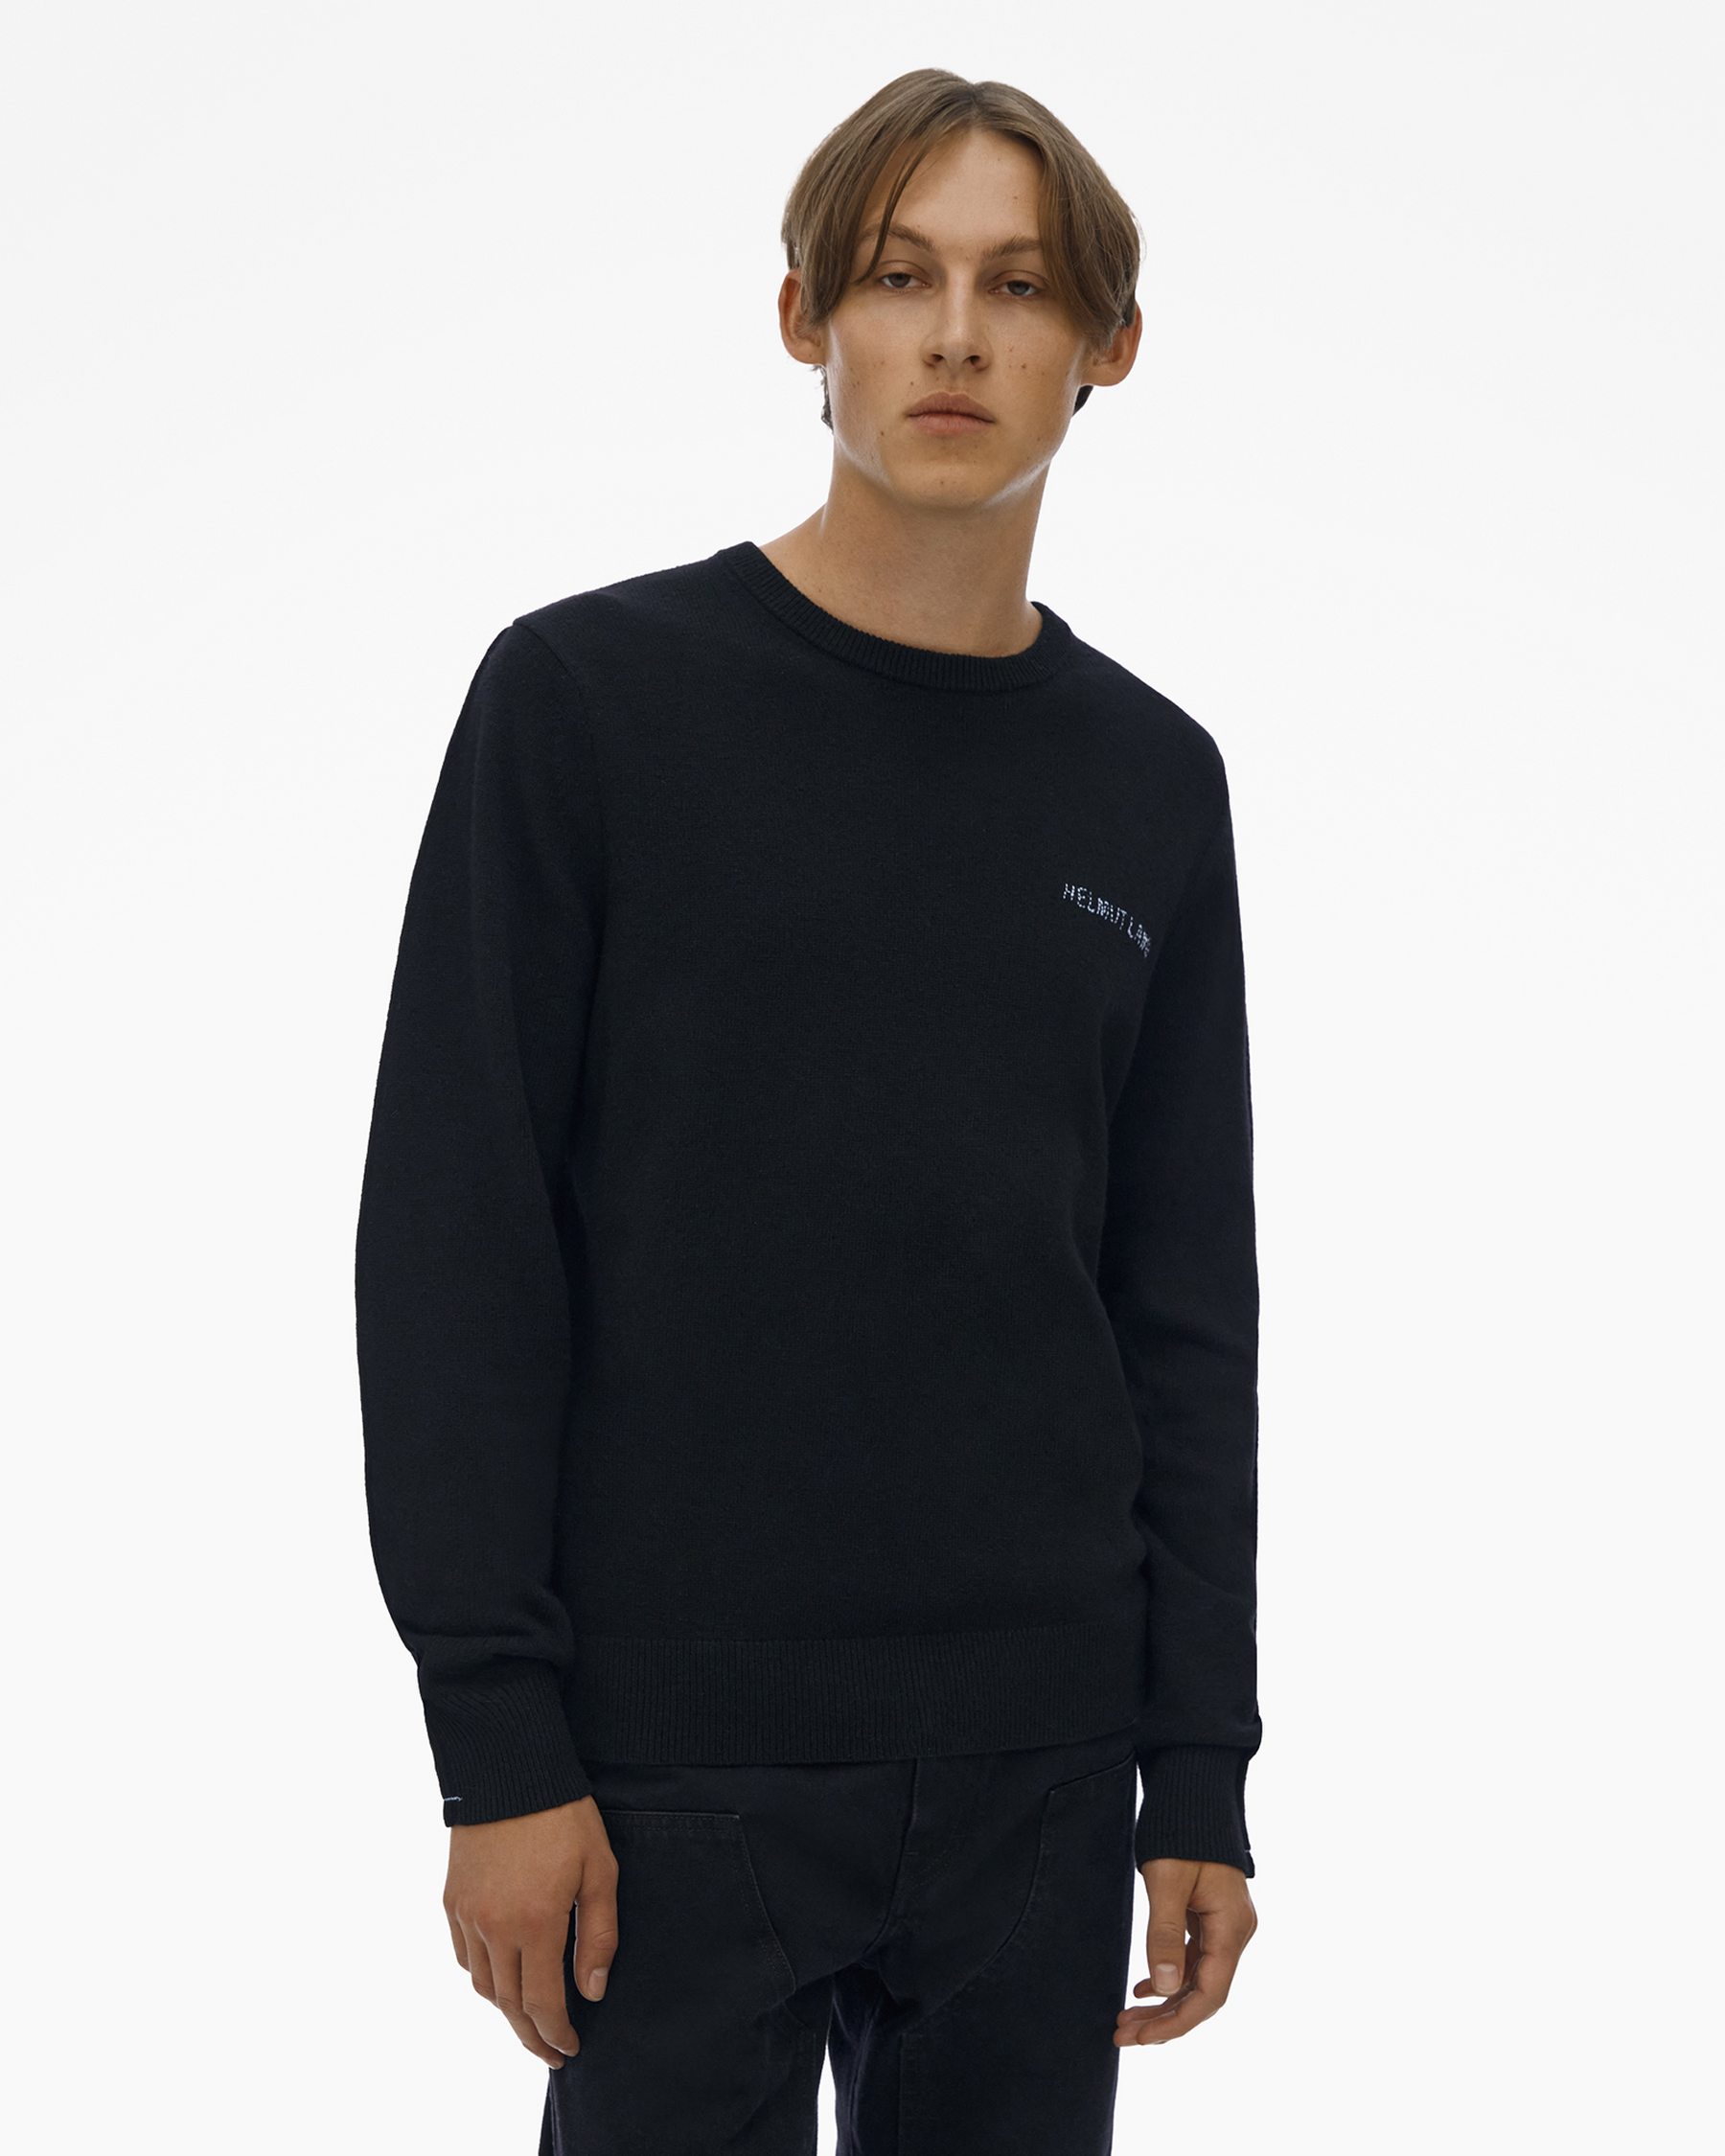 Embroidered Logo Sweater